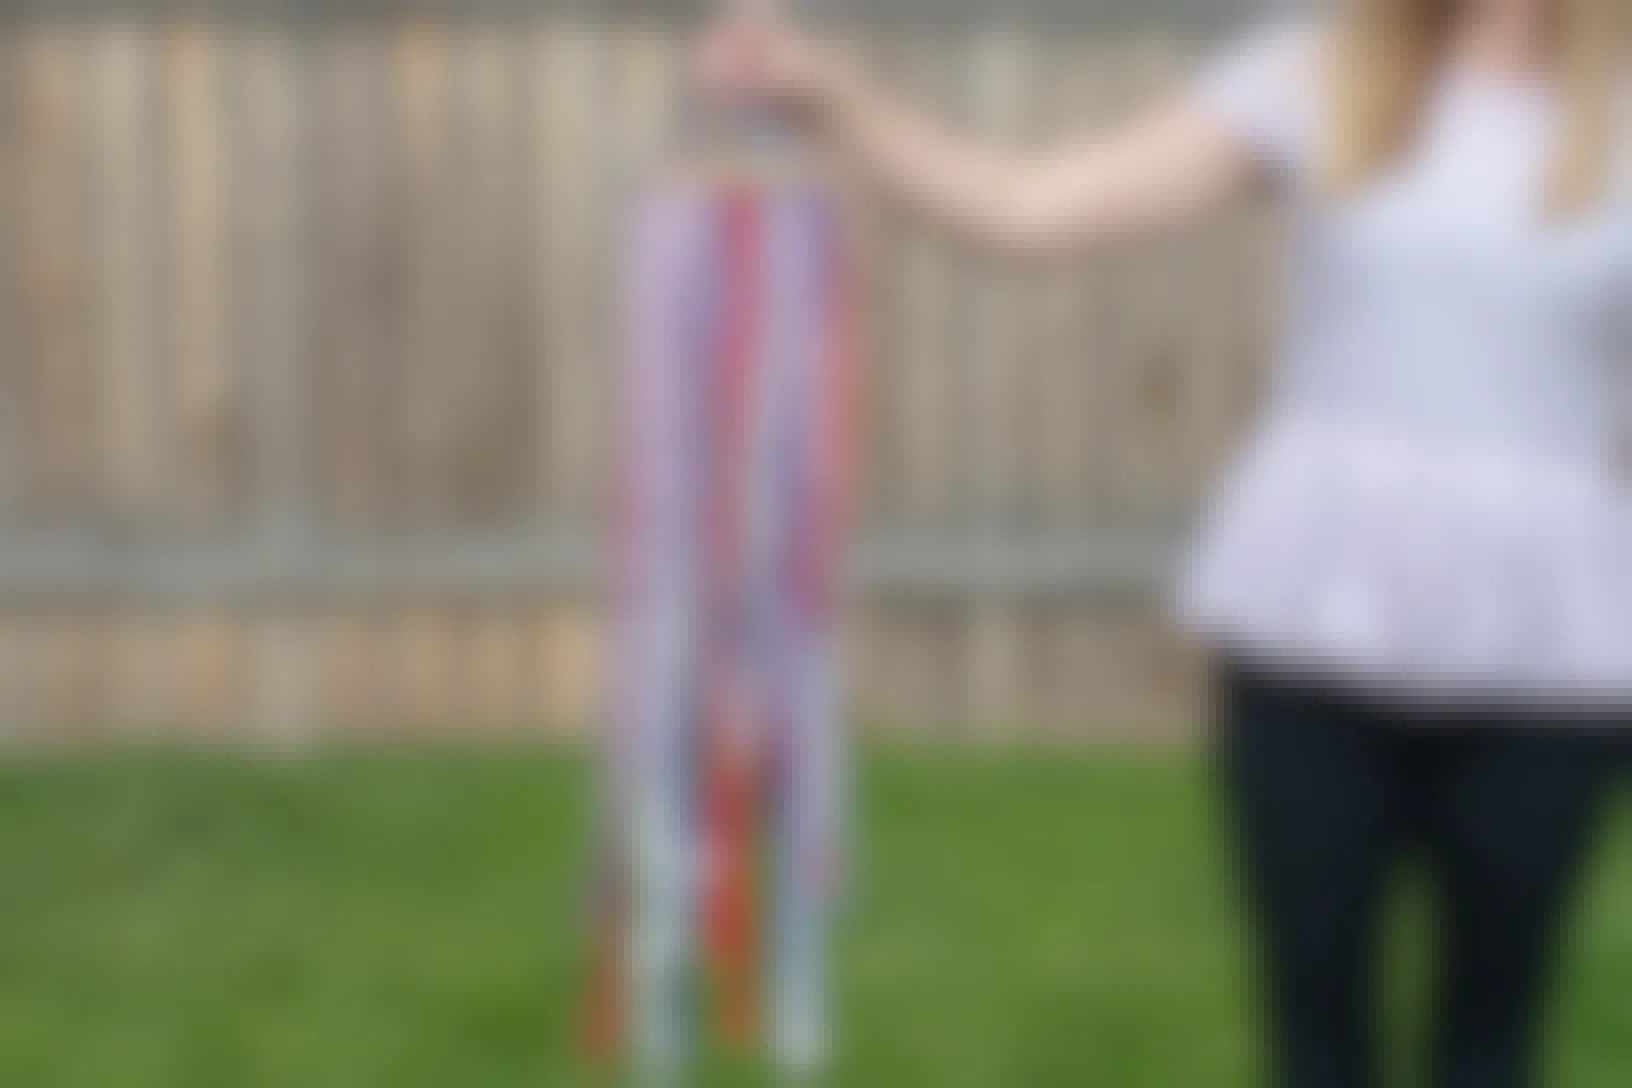 A person standing in a backyard, holding up a DIY windsock made of ribbon and an embroidery hoop.